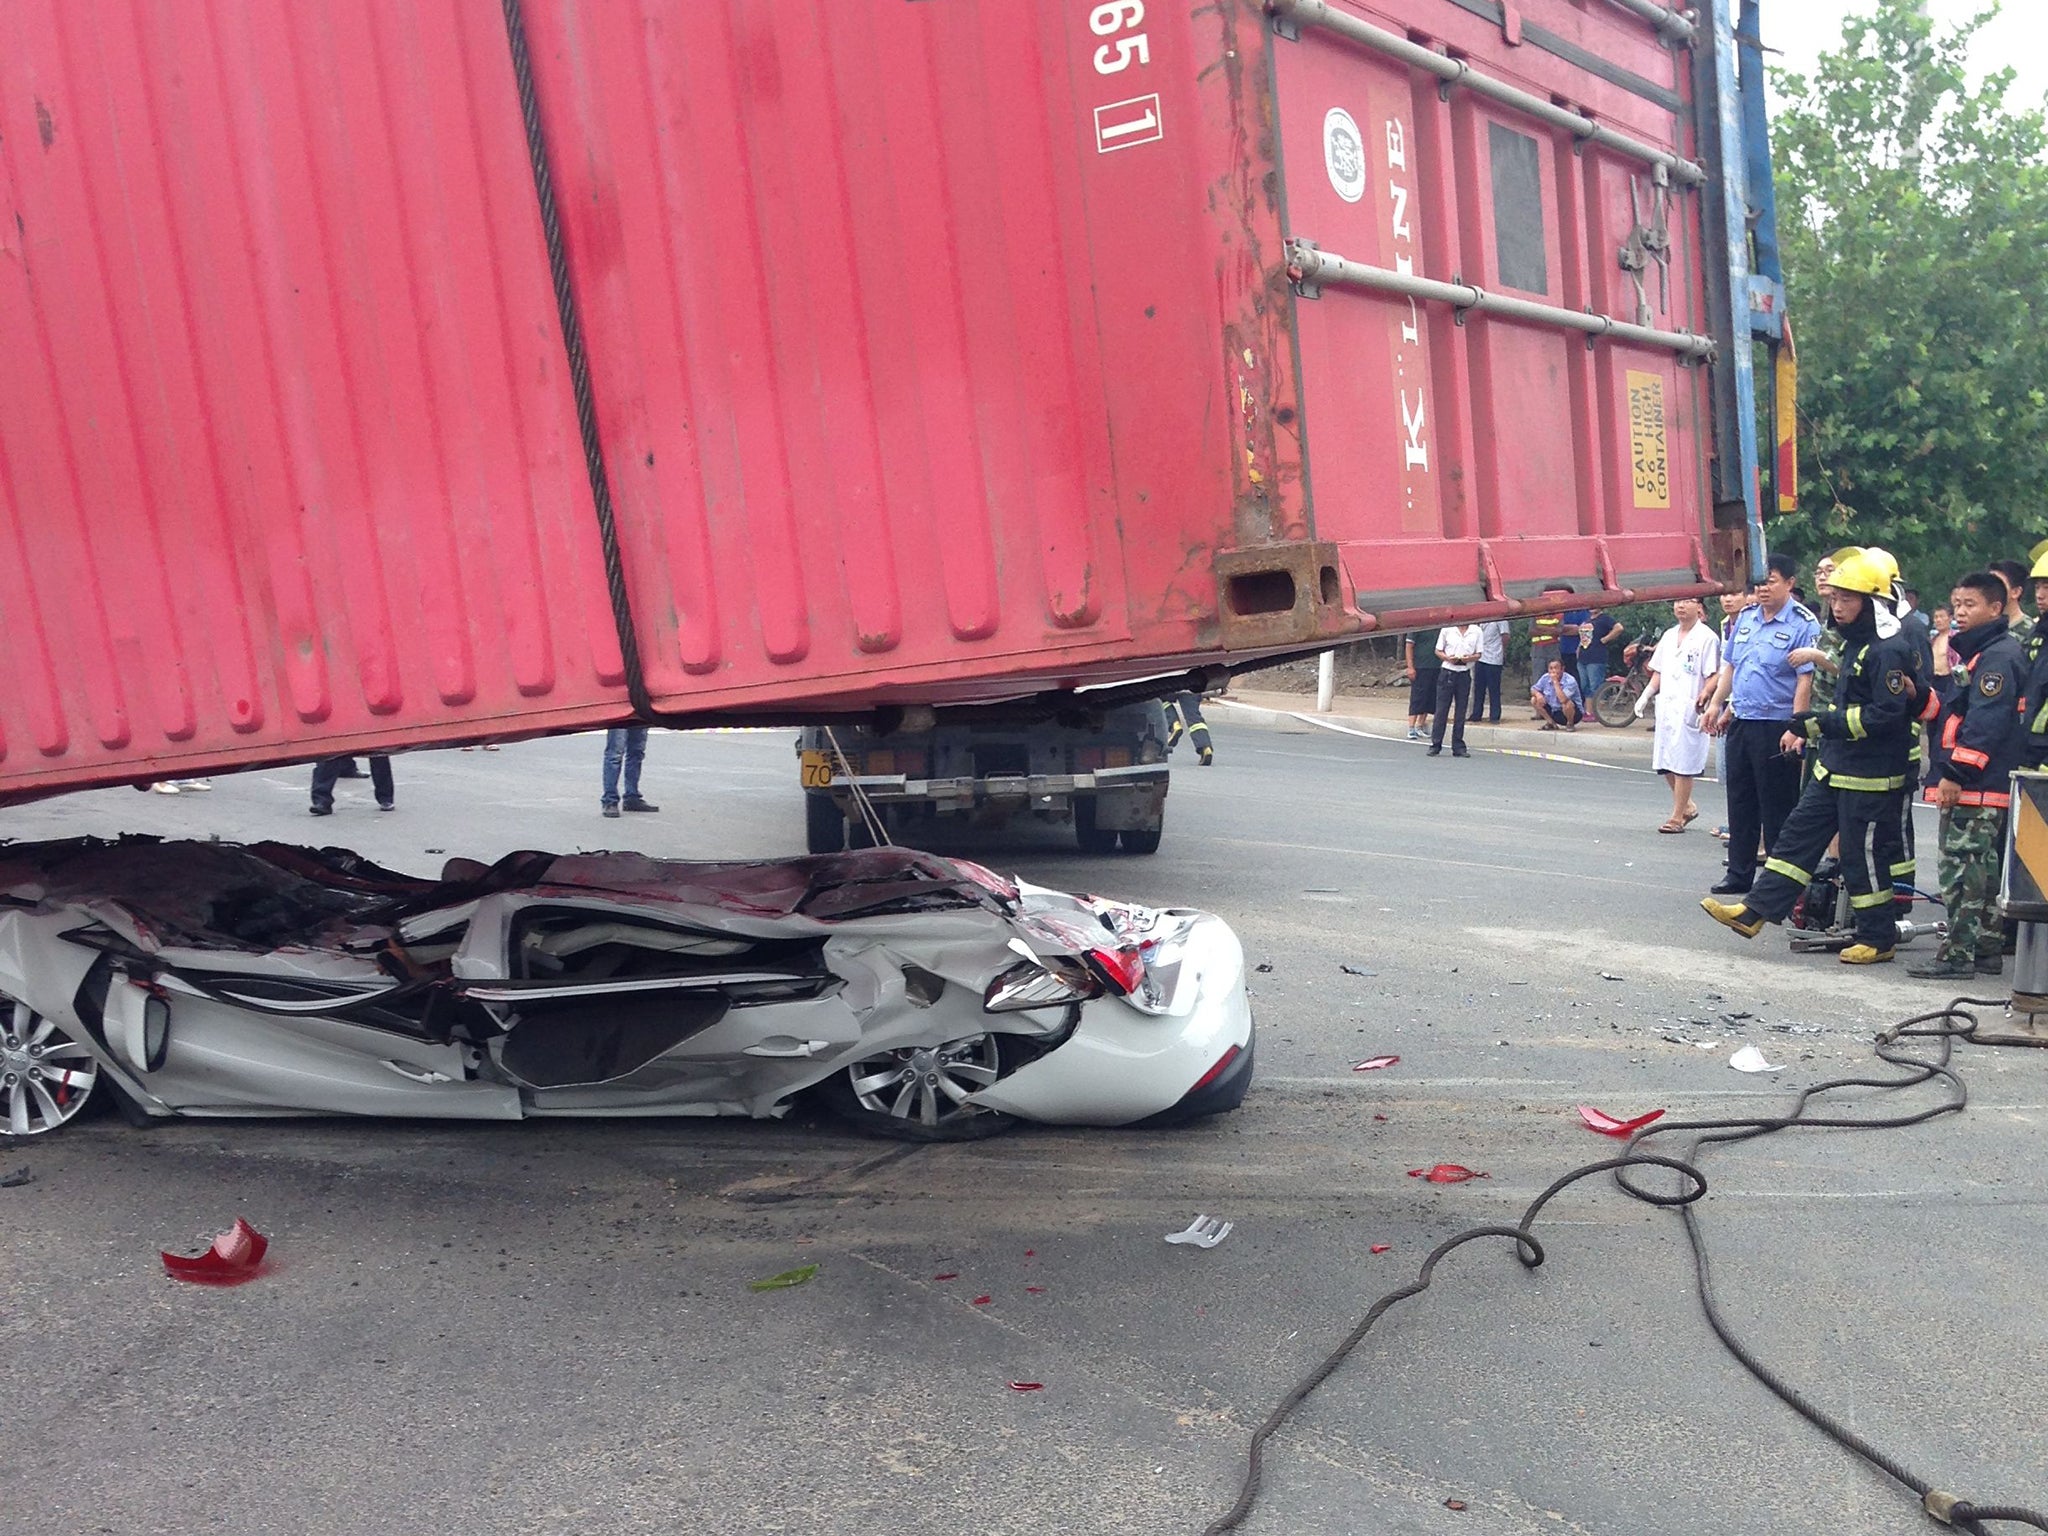 The container is lifted off the flattened car